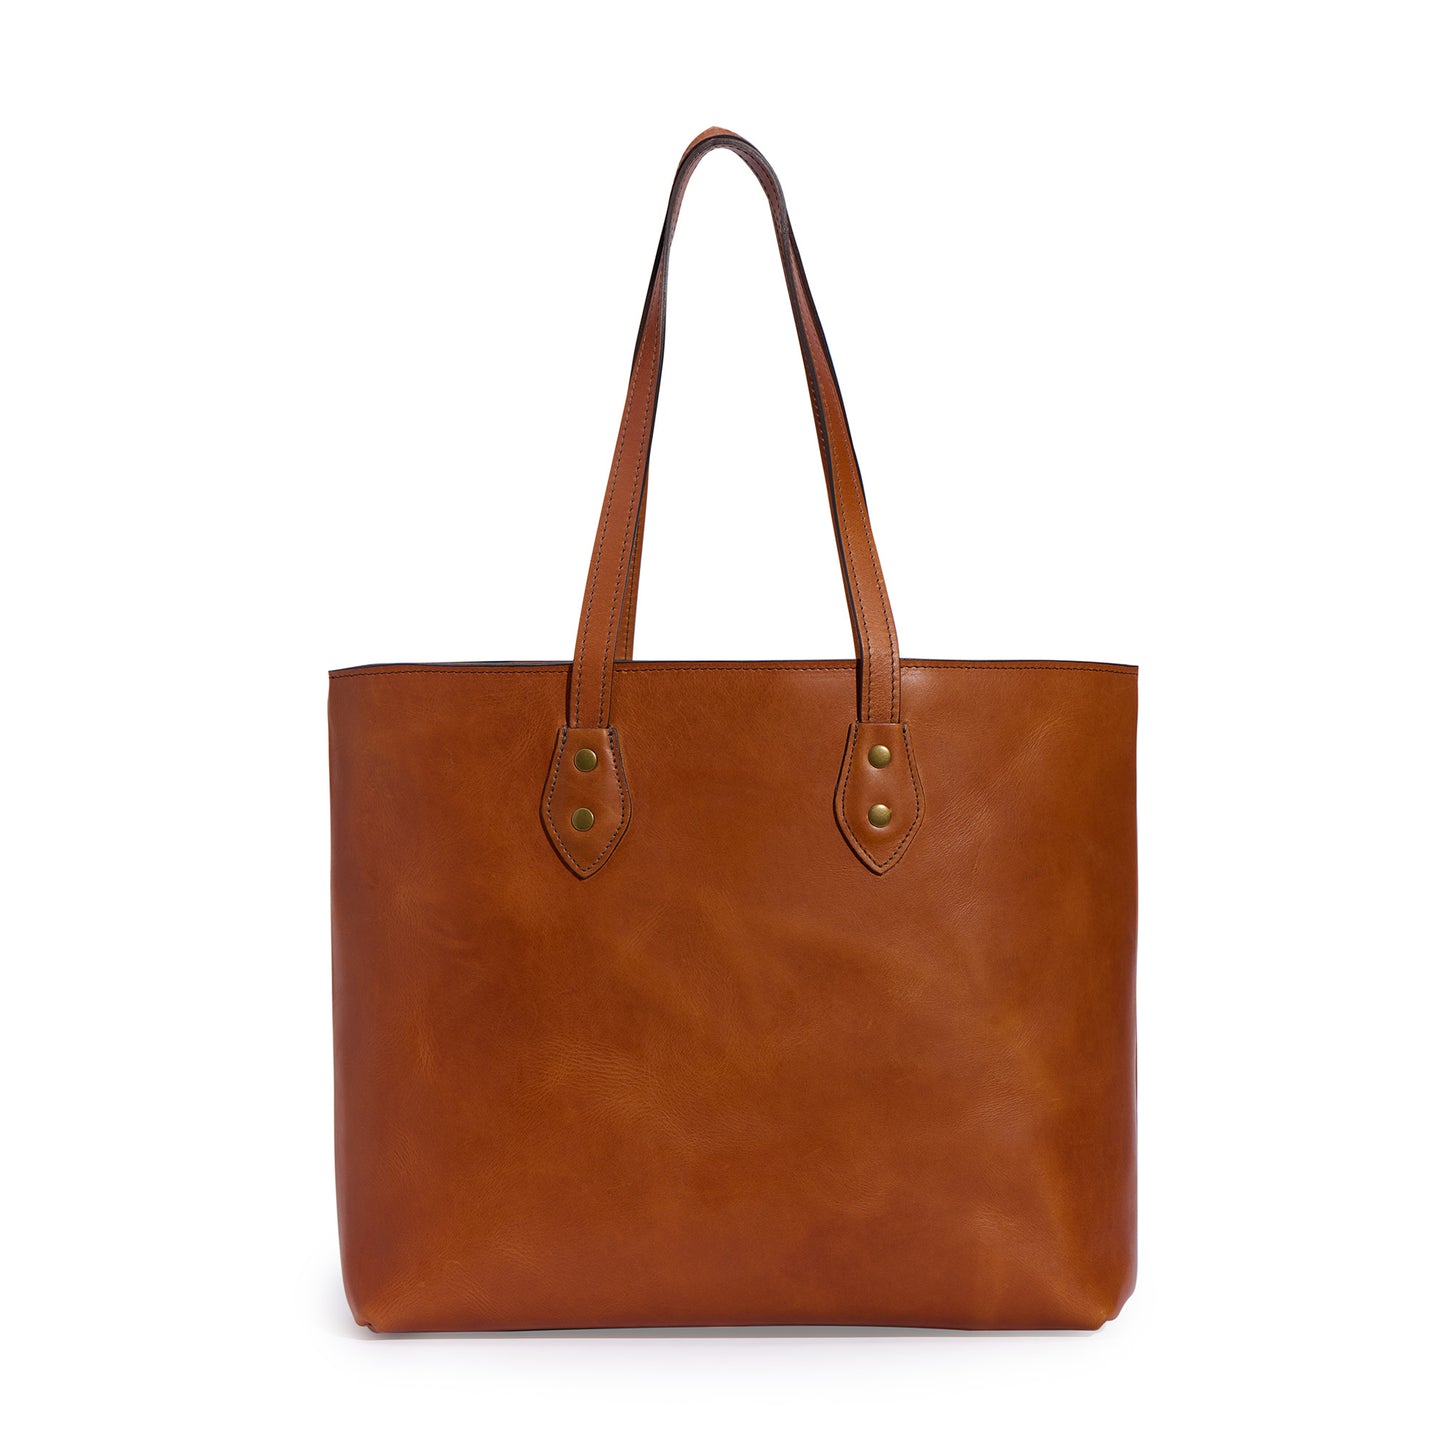 full grain leather tote bag in saddle tan color by Jackson Wayne - front 